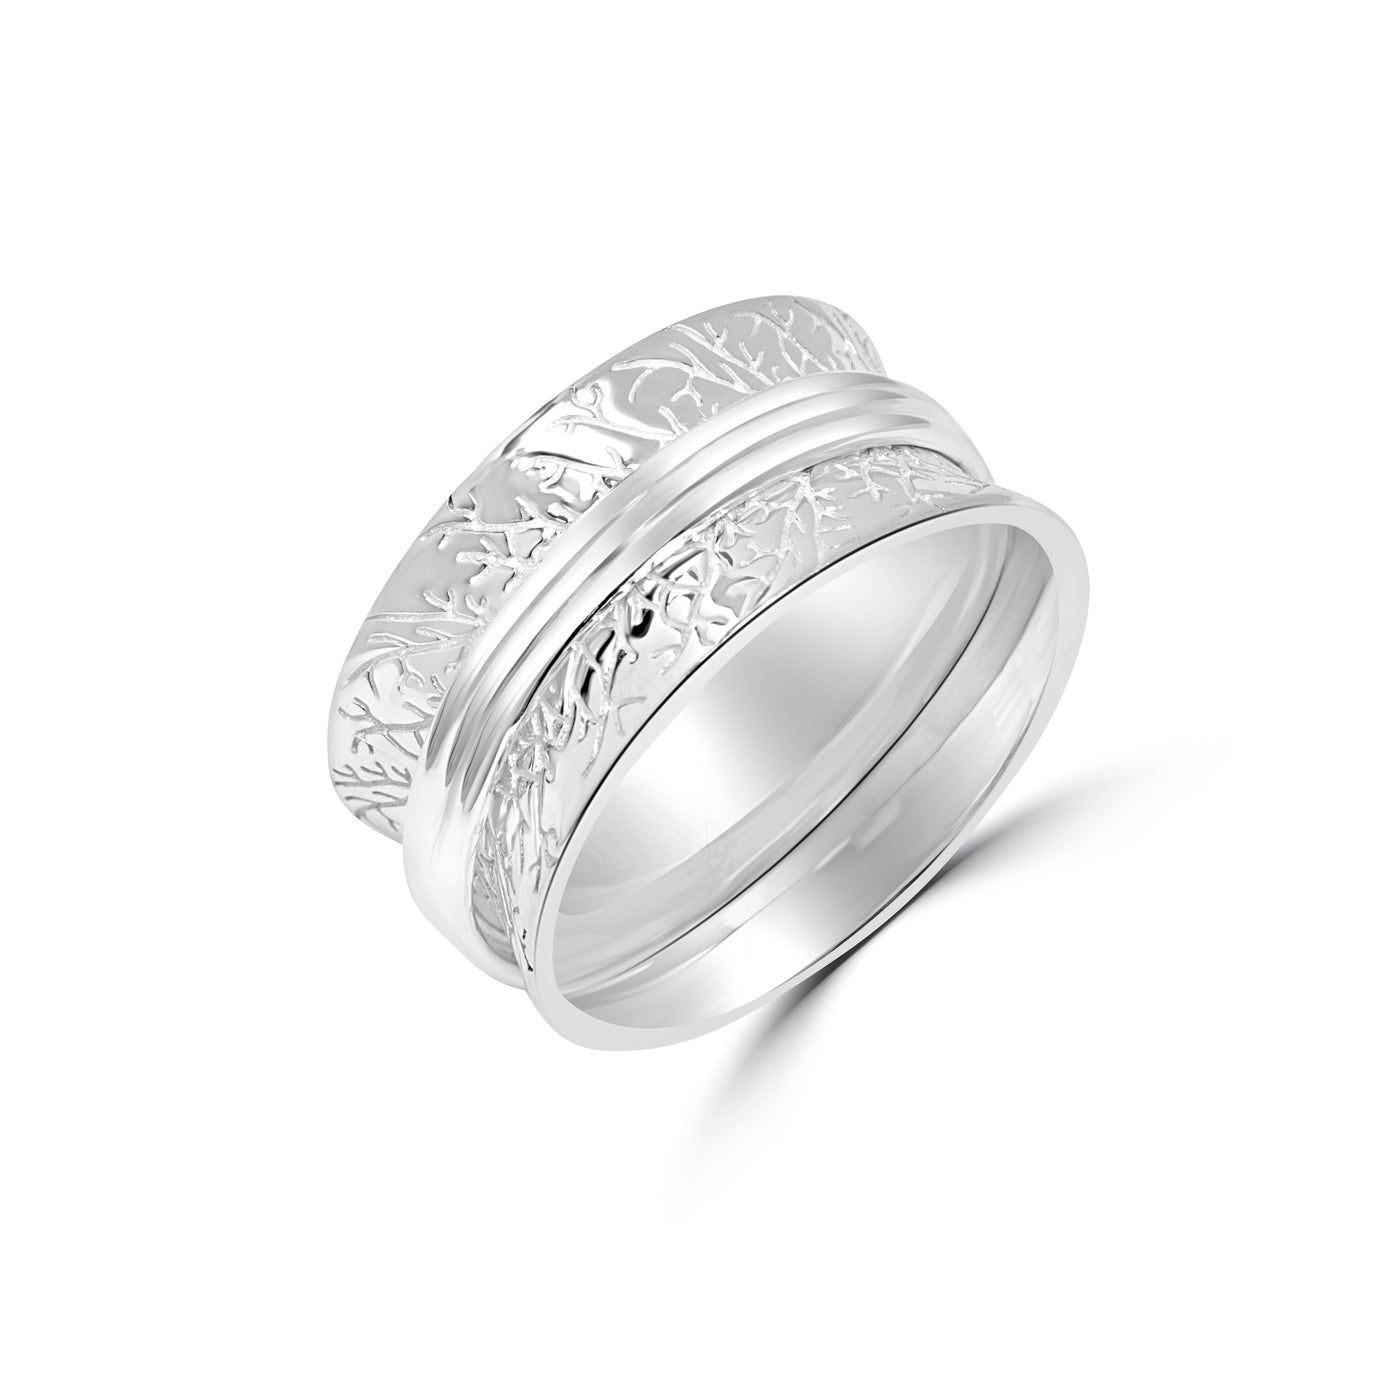 Best Anxiety Rings - Silver Courage Mindful Ring by Sinead Hegarty ...